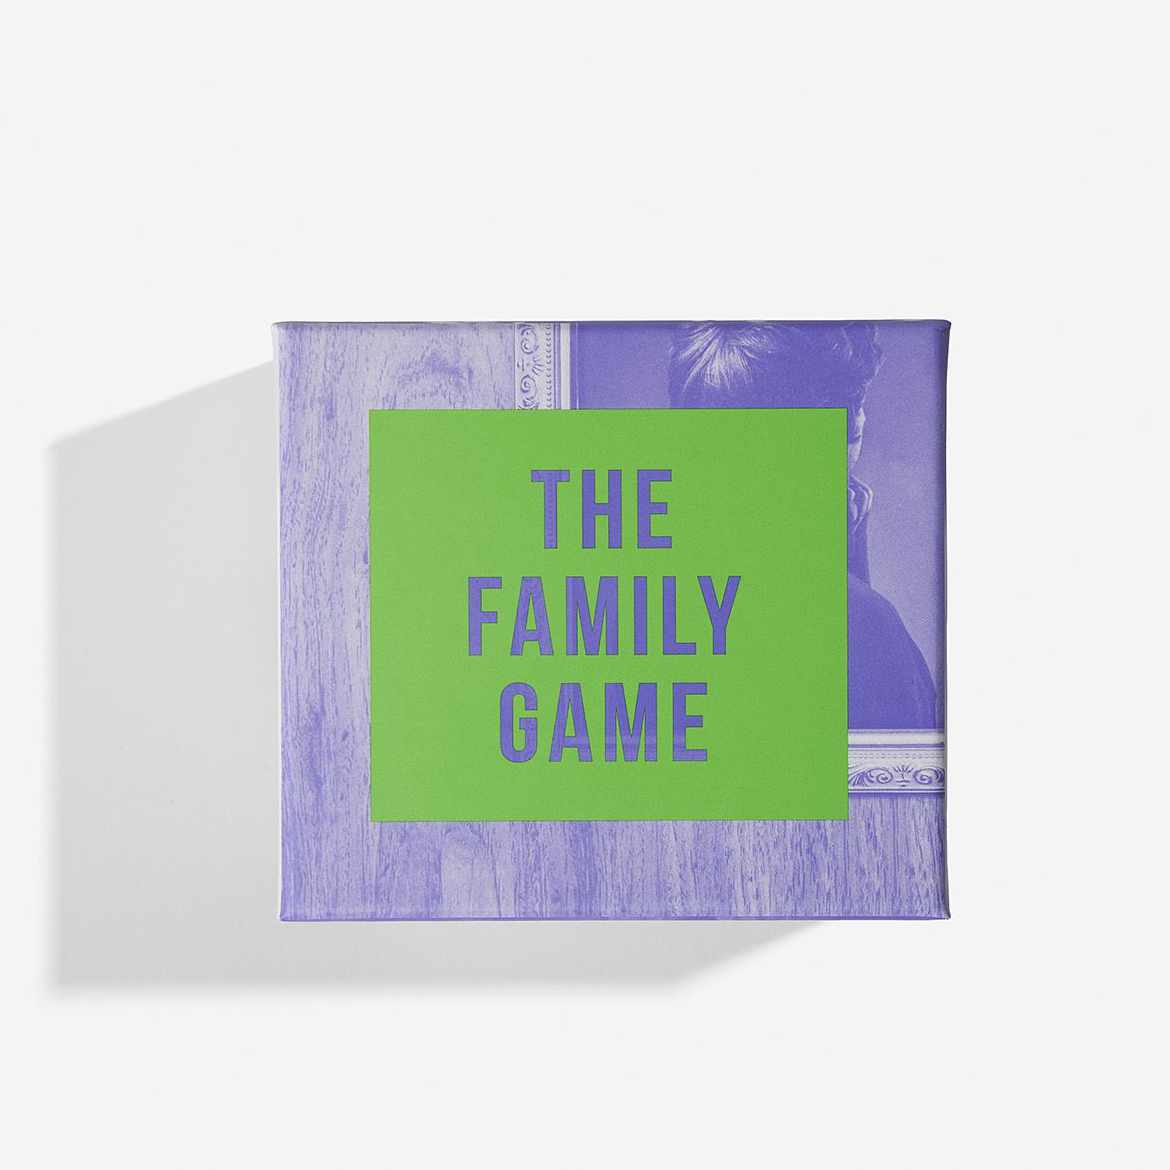 THE FAMILY GAME | FAMILIEN WÜRFELSPIEL | English Edition | The School of Life